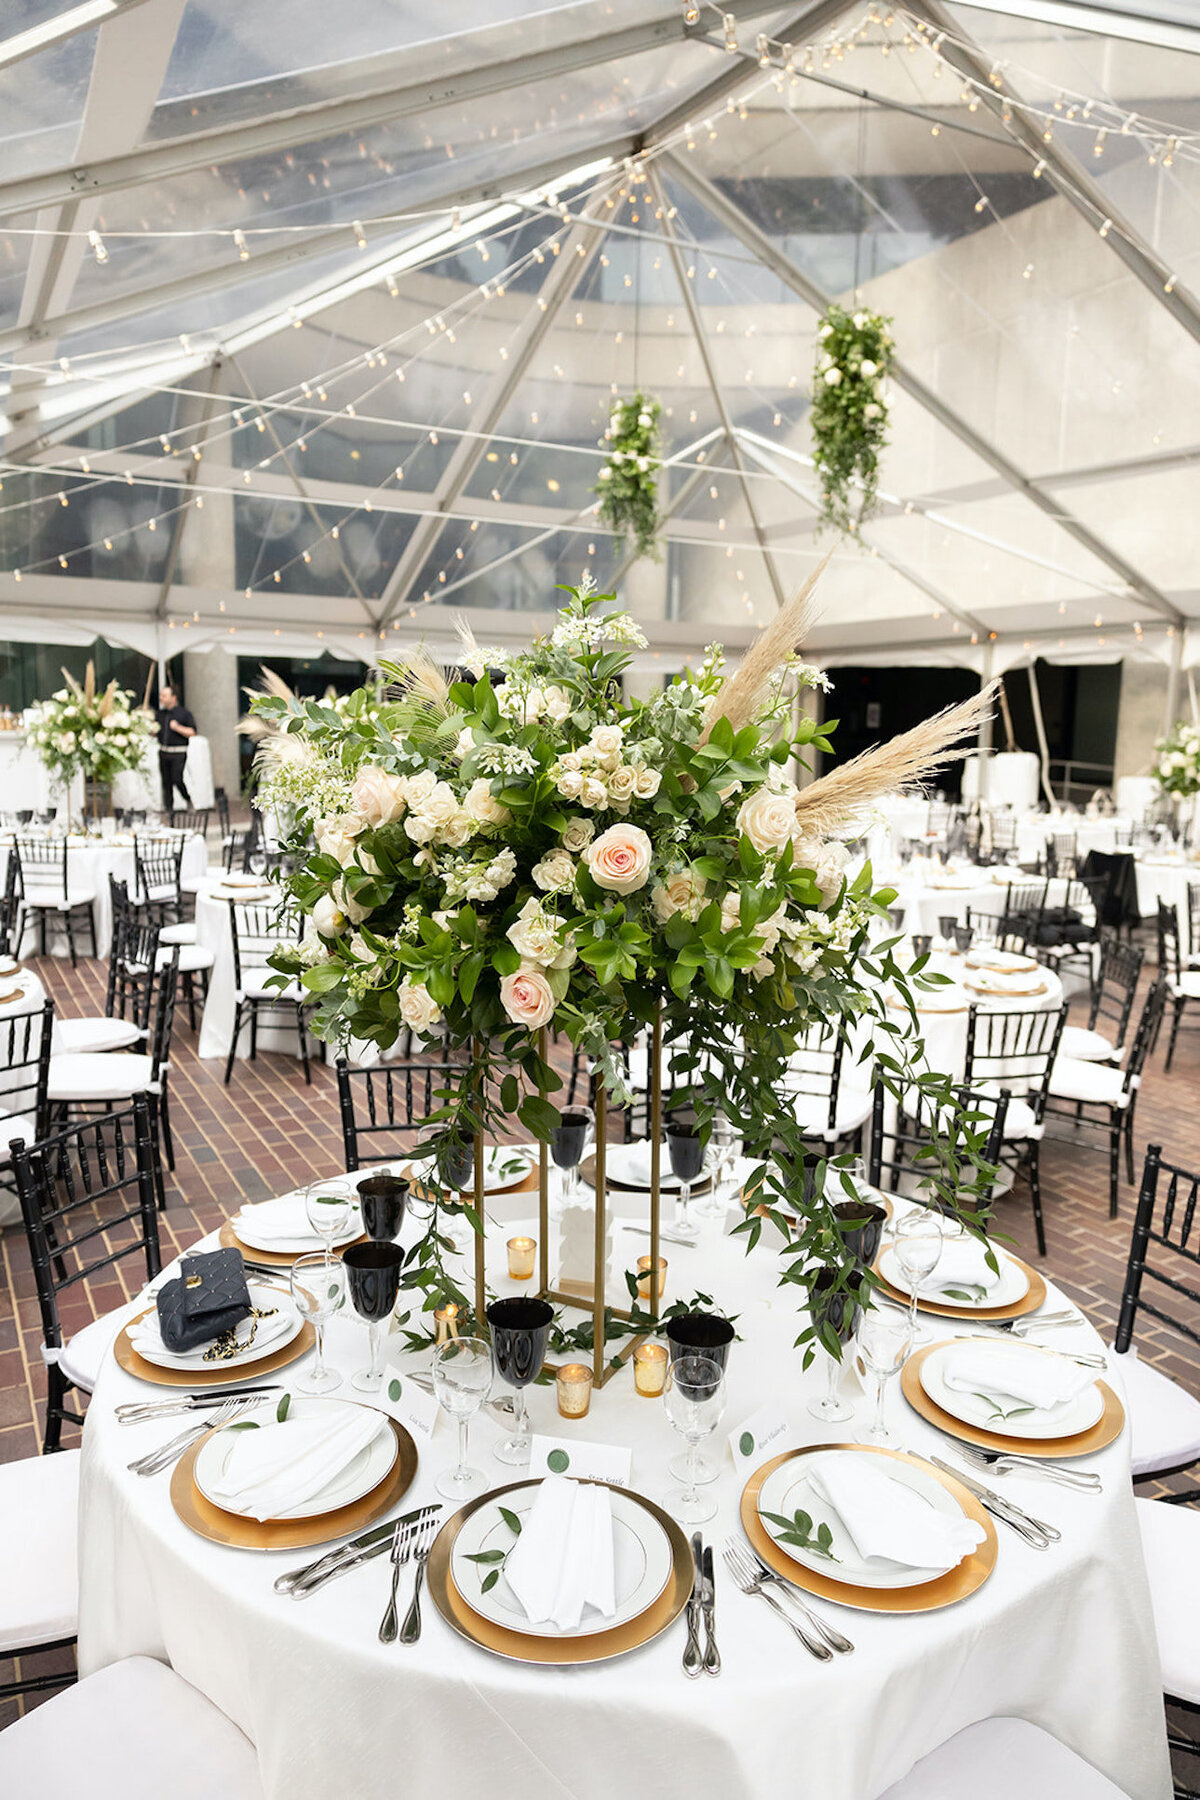 Elise-Connor-American-Institute-of-architects-Wedding-The-finer-points-event-planning-genevieve-leiper-photography00037